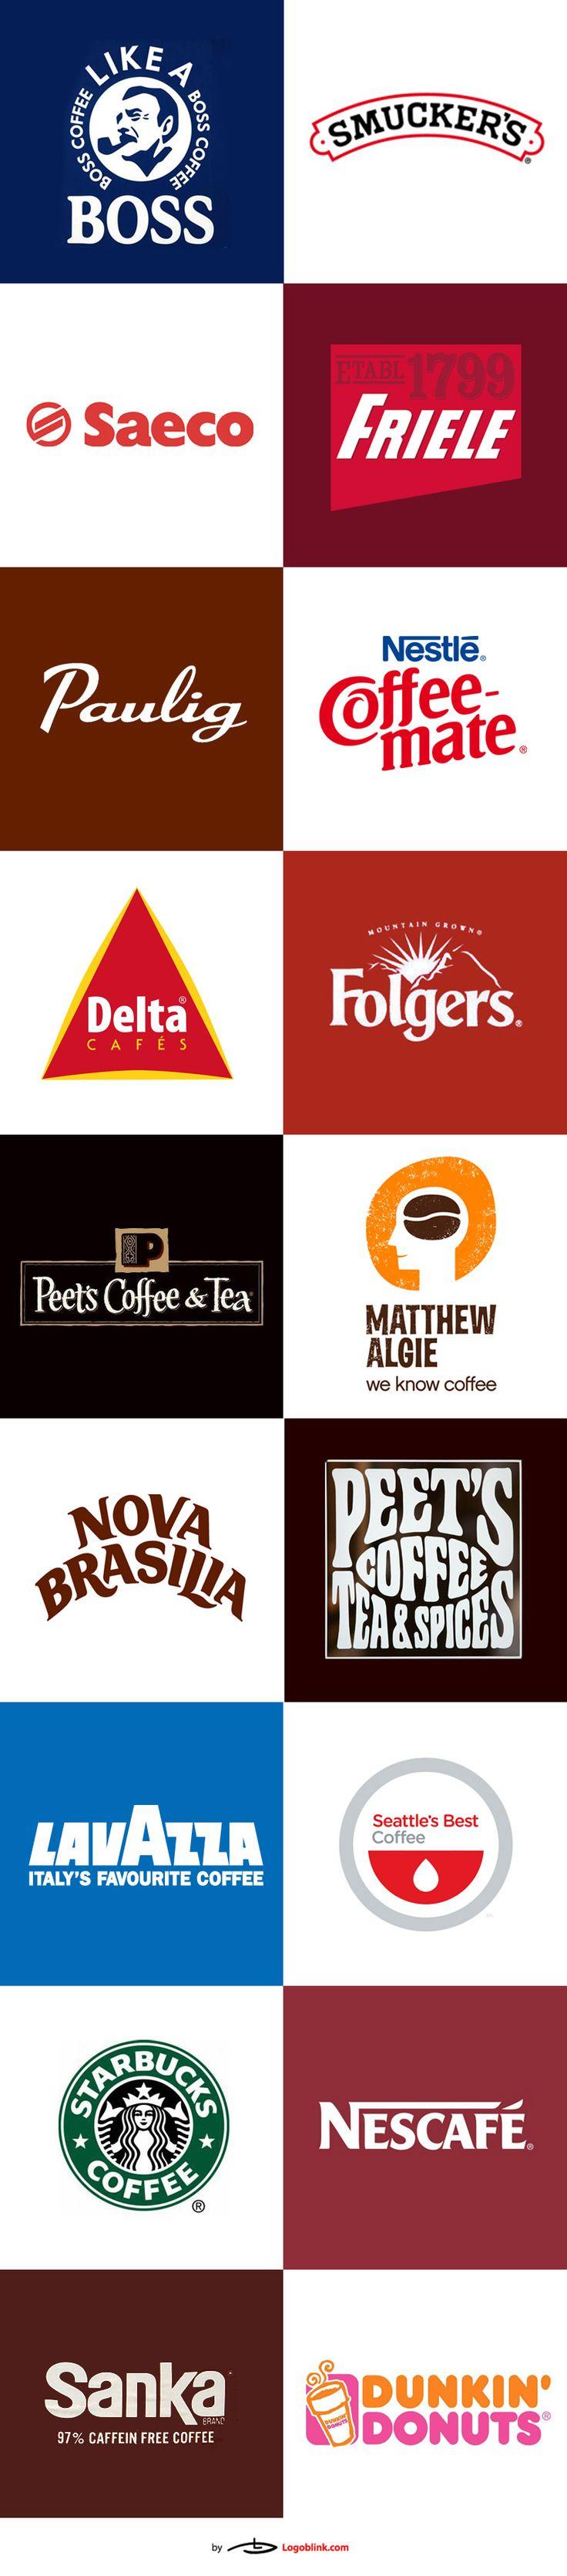 Famous Coffee Logo - Famous coffee logos from around the world